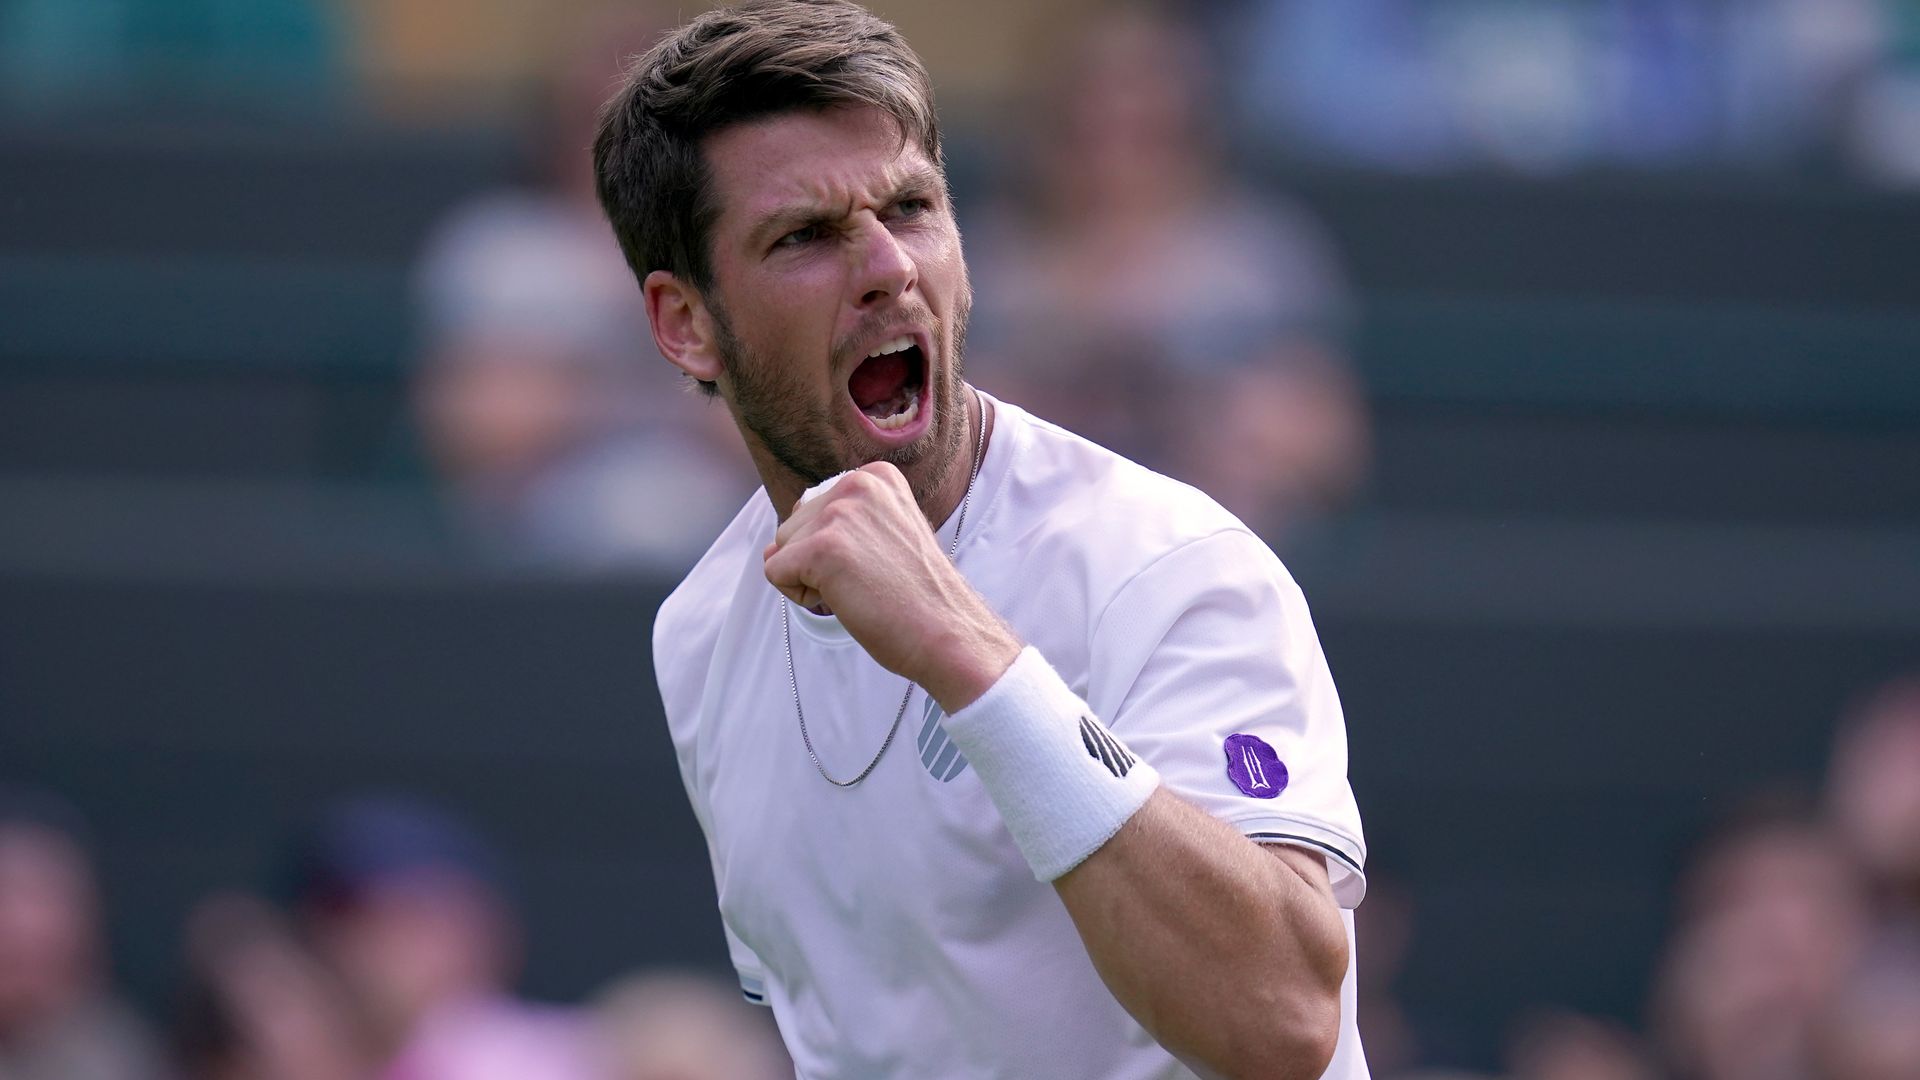 Norrie plays down injury concerns I 'I want to use crowd to my advantage'